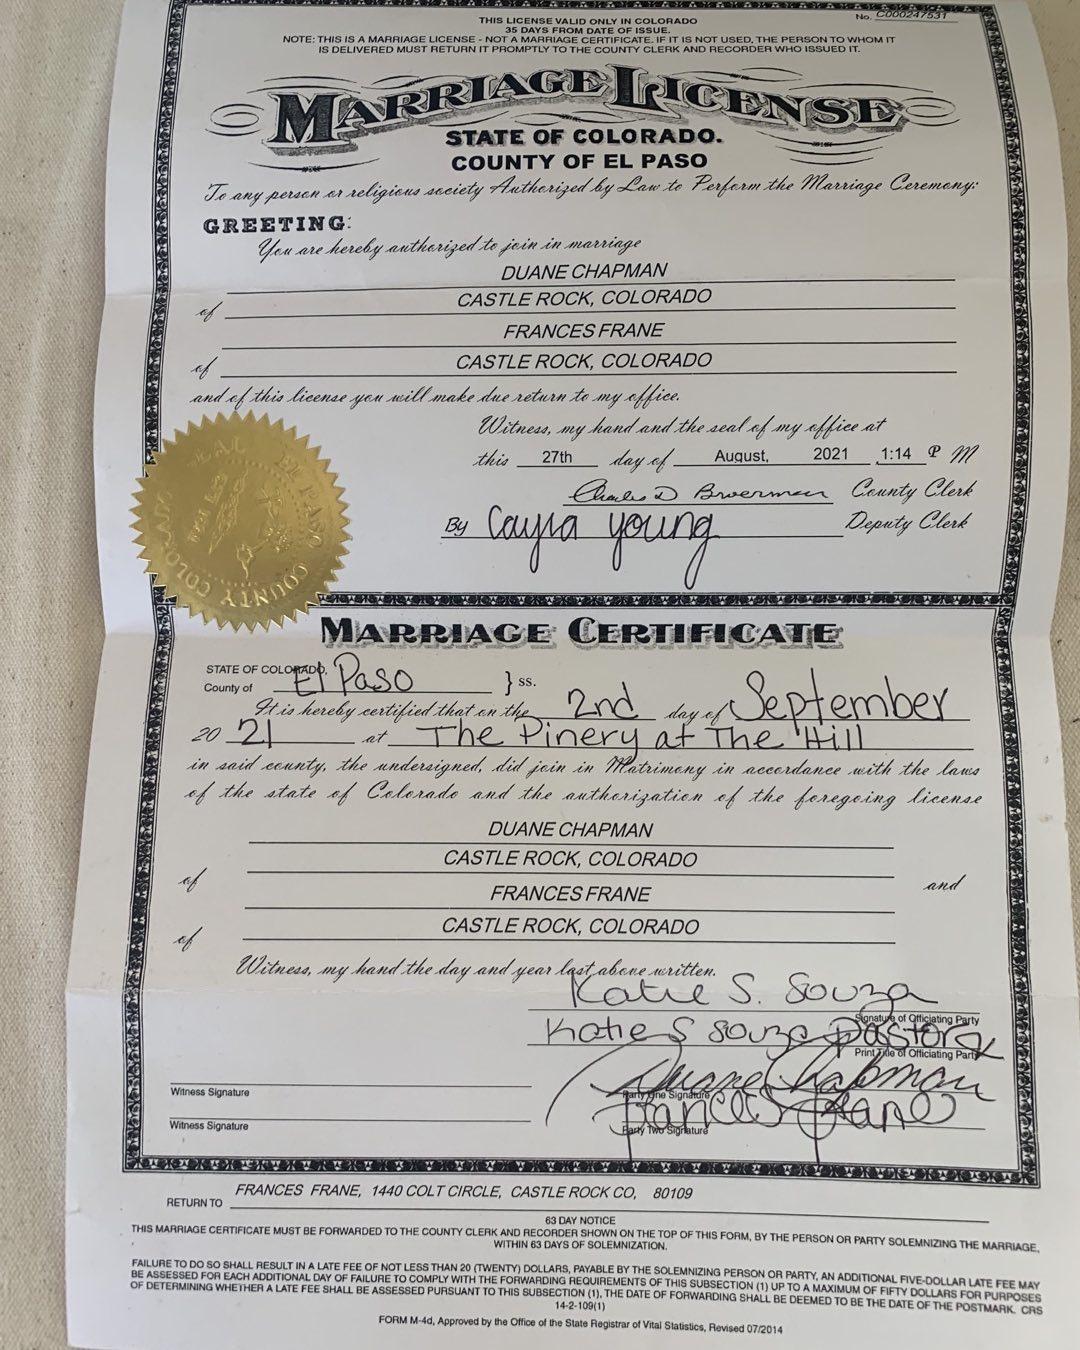 Dog The Bounty Hunter Shows Off His New Marriage License, ‘It’s Official!’